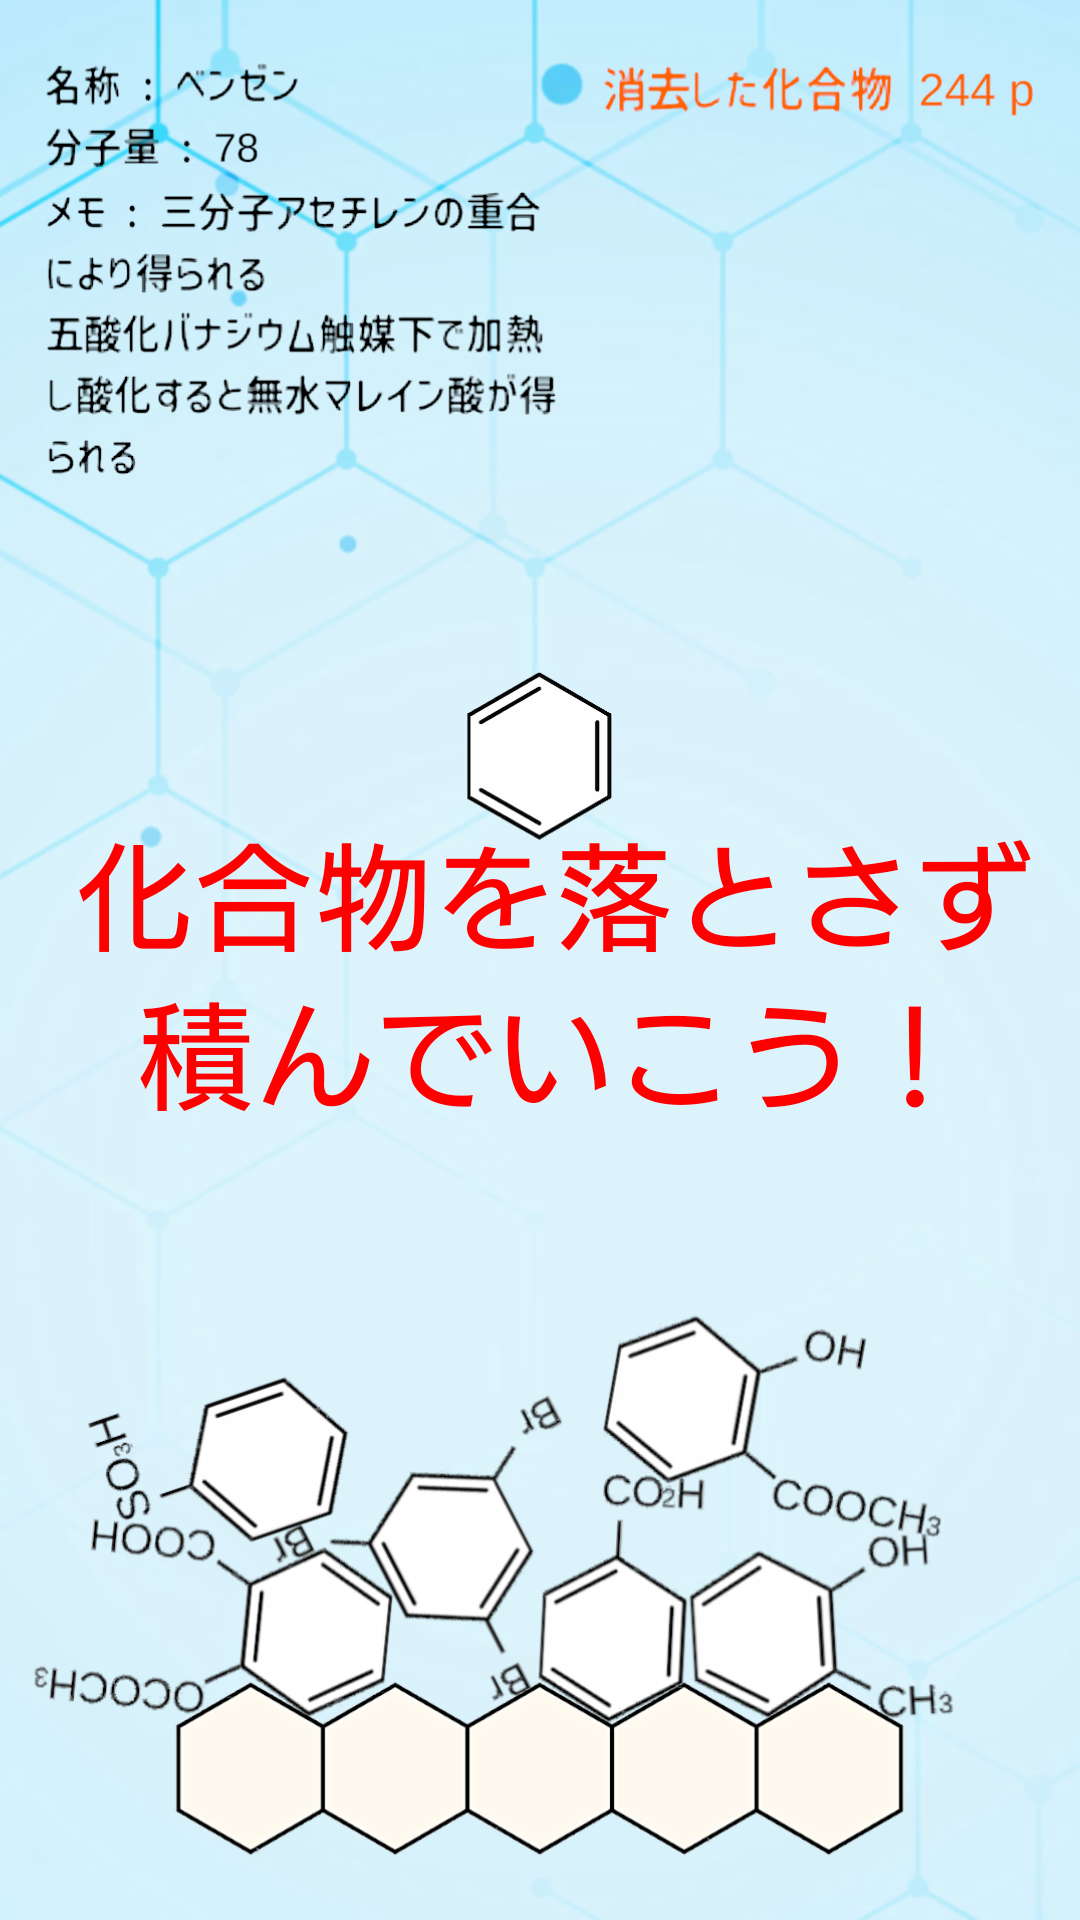 Screenshot 1 of Organic Chemistry Crush Study organic chemistry (aromatic compounds) with games 1.6